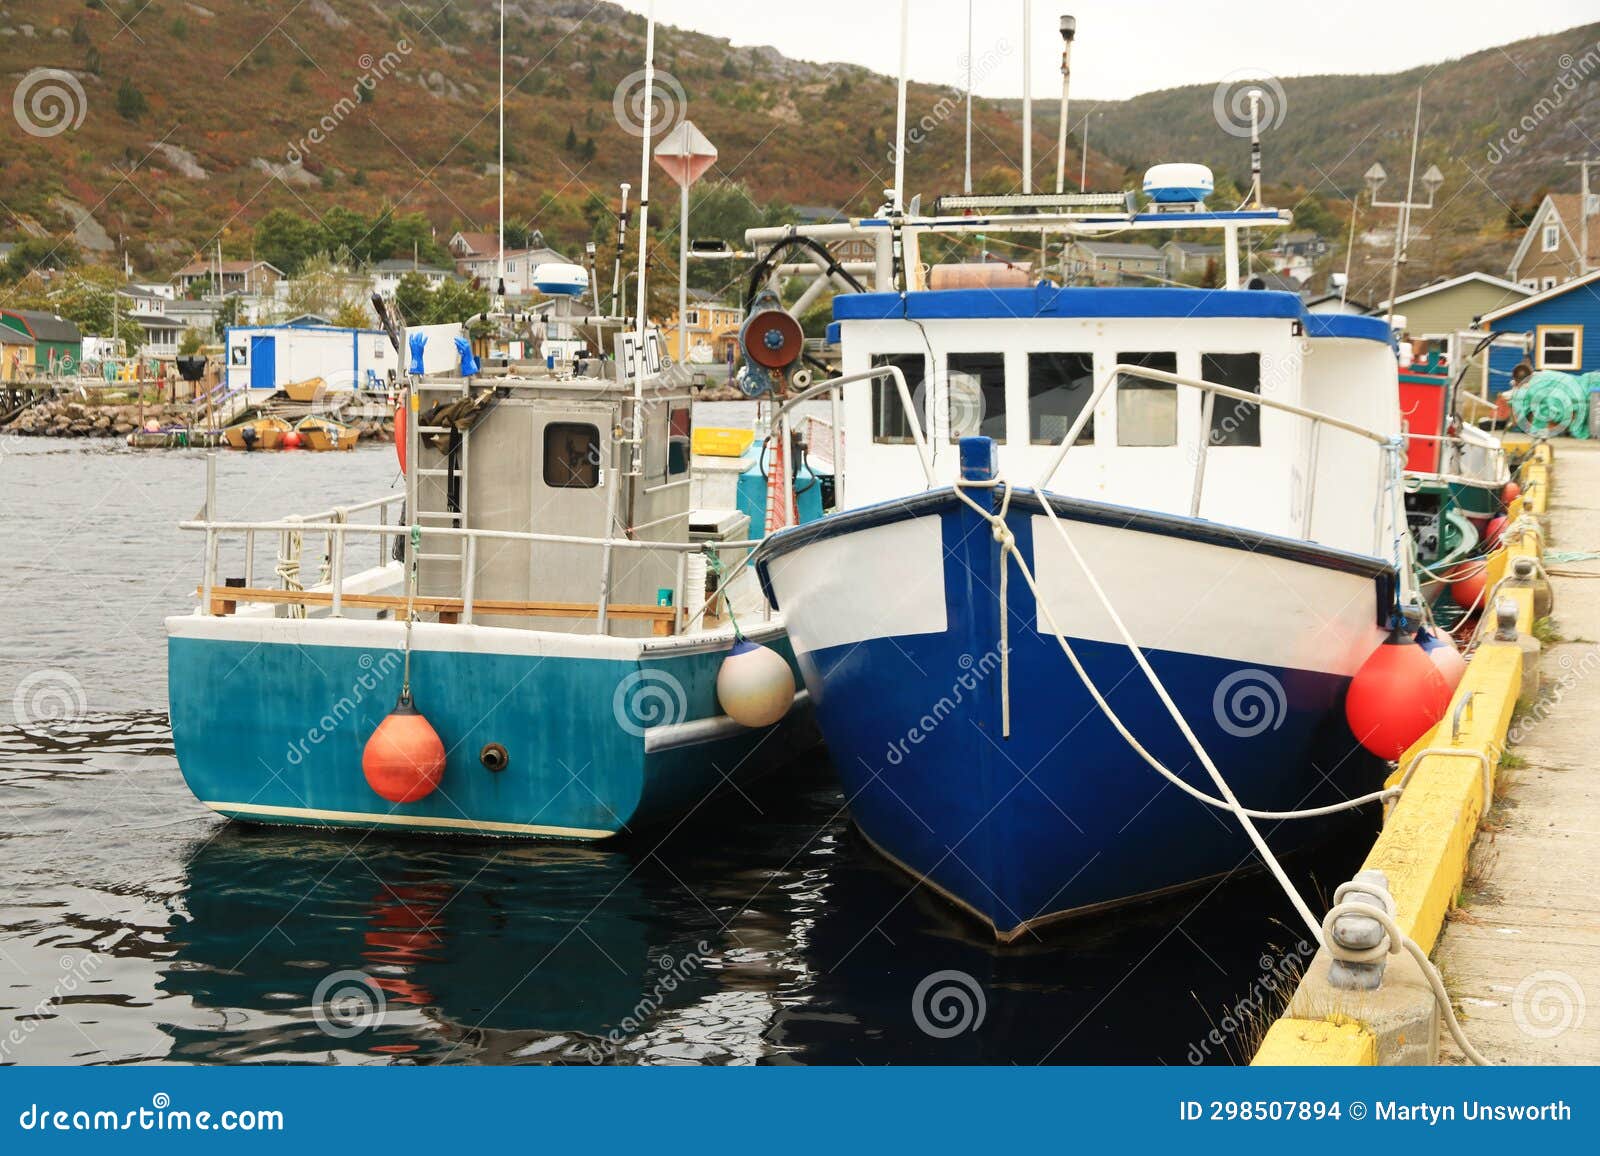 https://thumbs.dreamstime.com/z/fishing-boats-tied-to-jetty-petty-harbor-newfoundland-community-located-canadian-province-labrador-dock-298507894.jpg